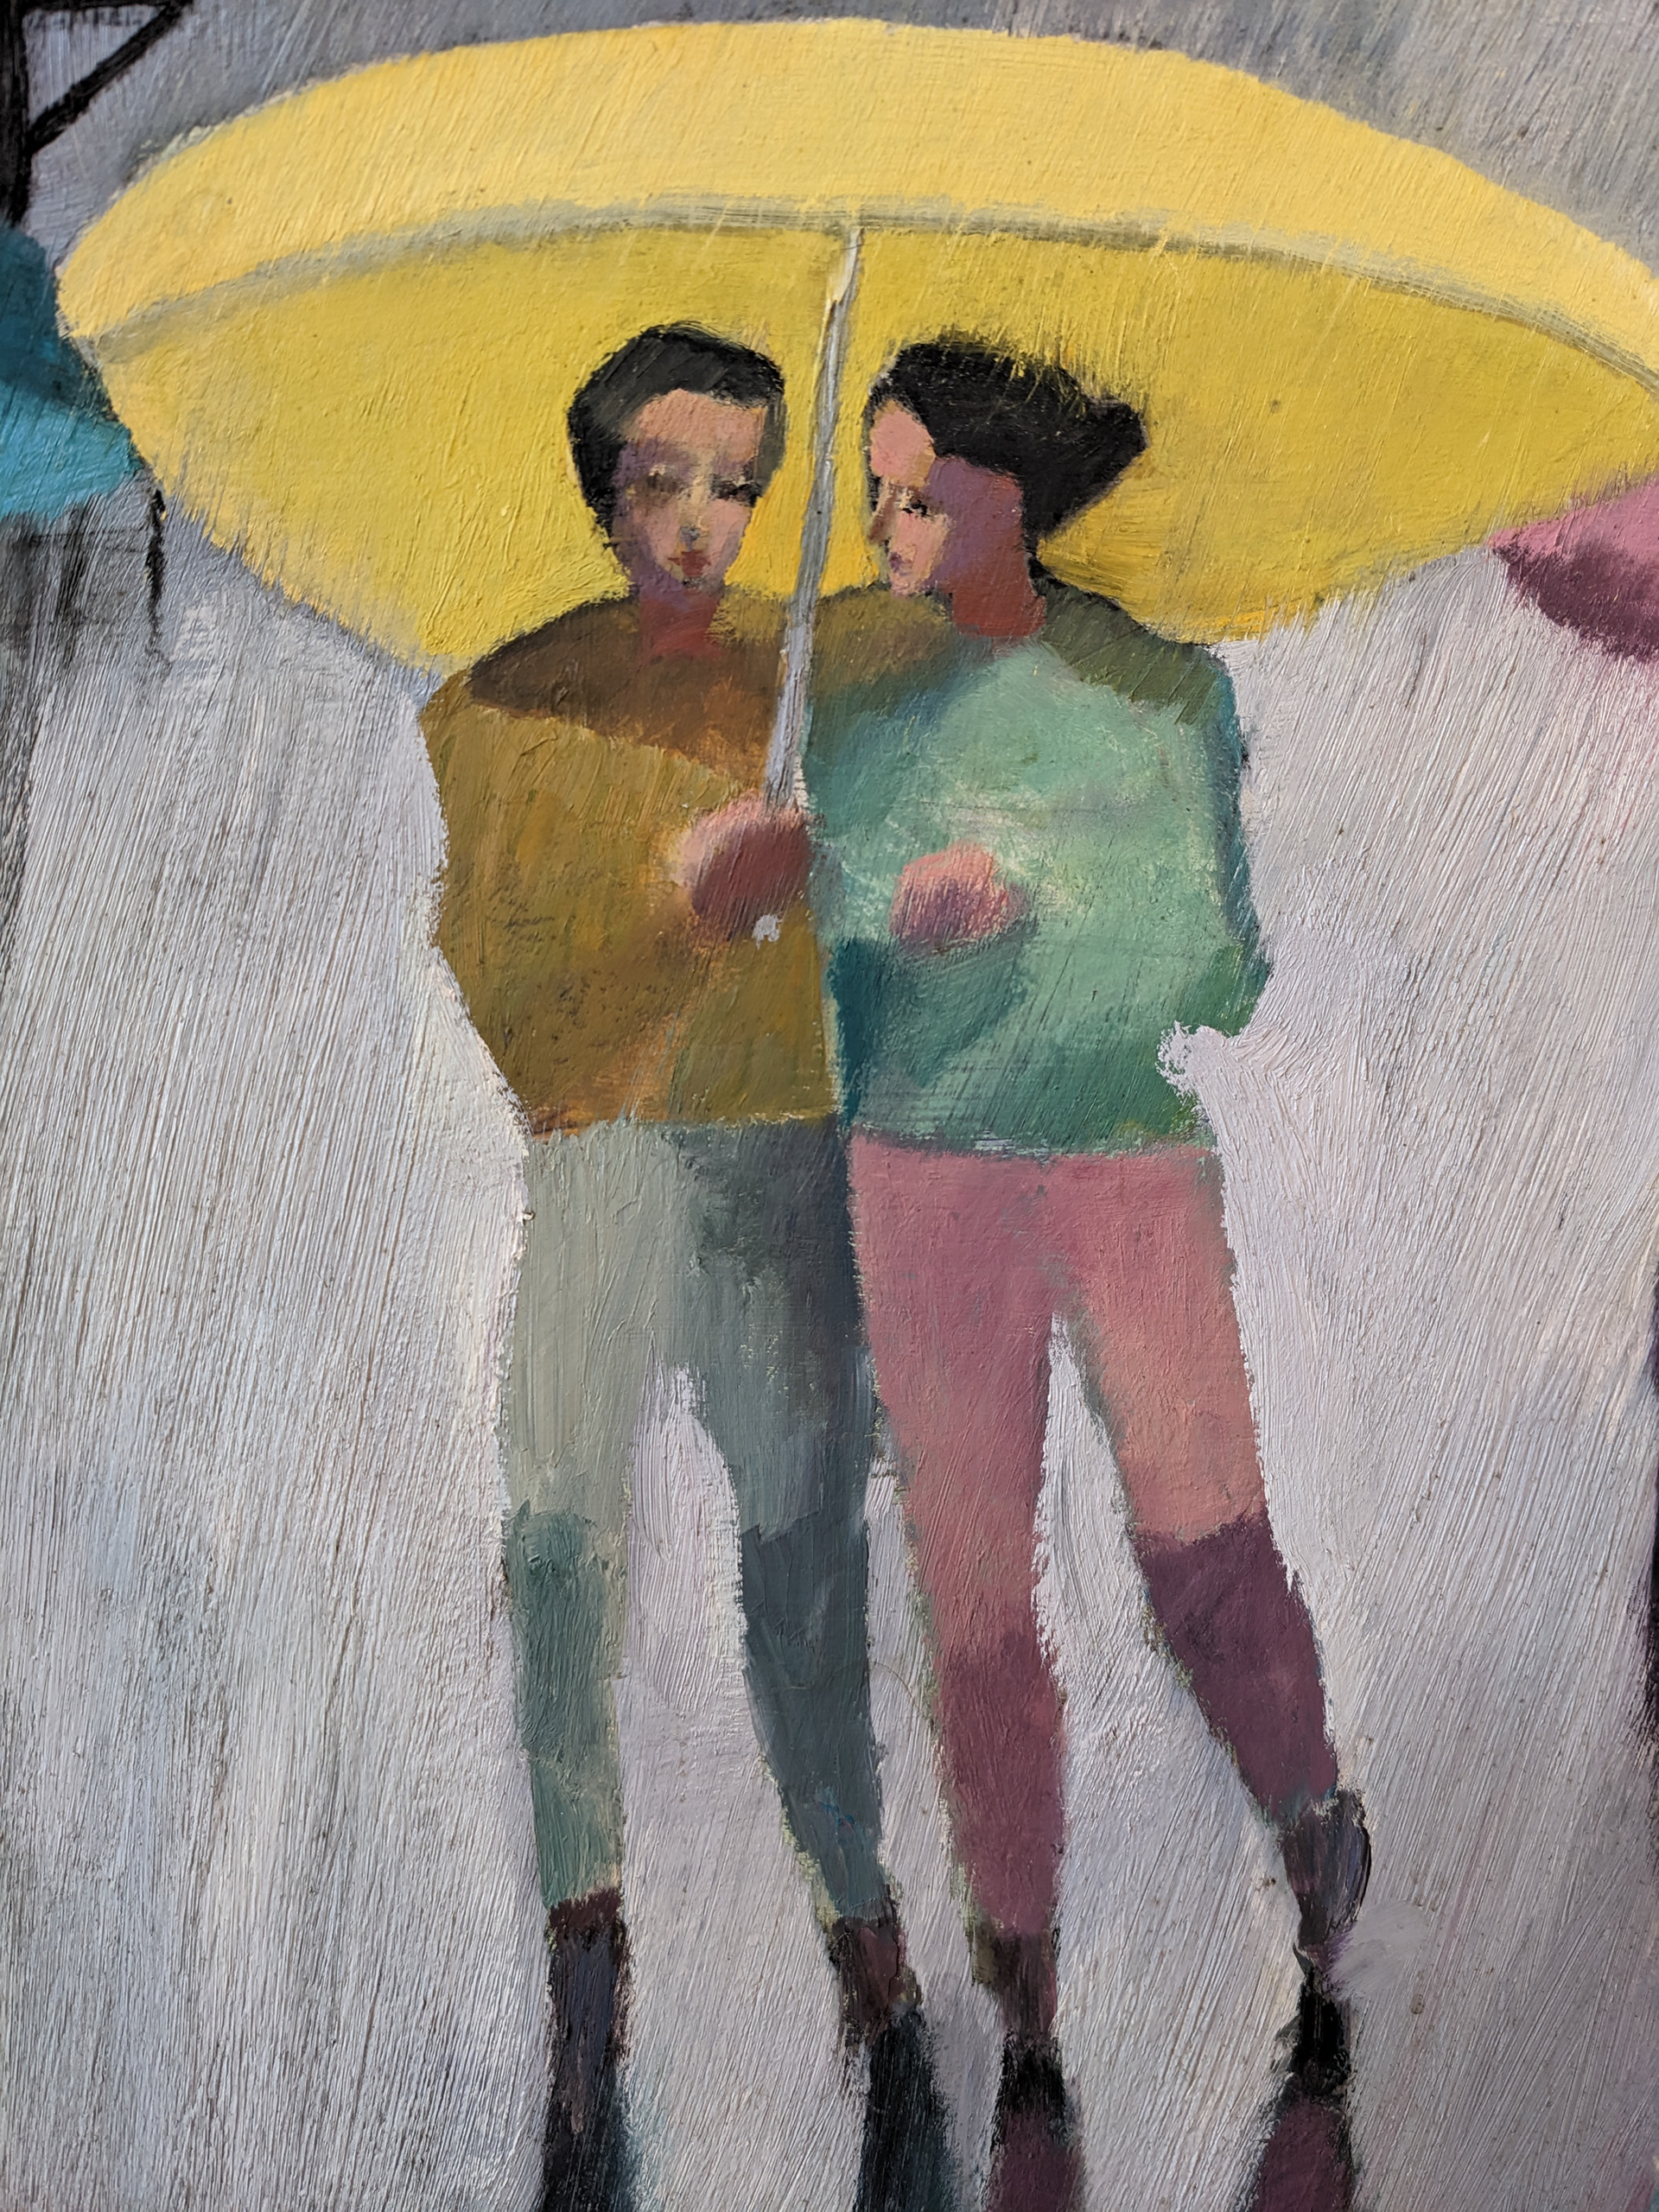 NYC: Walking in the Rain with You by Michael Patterson